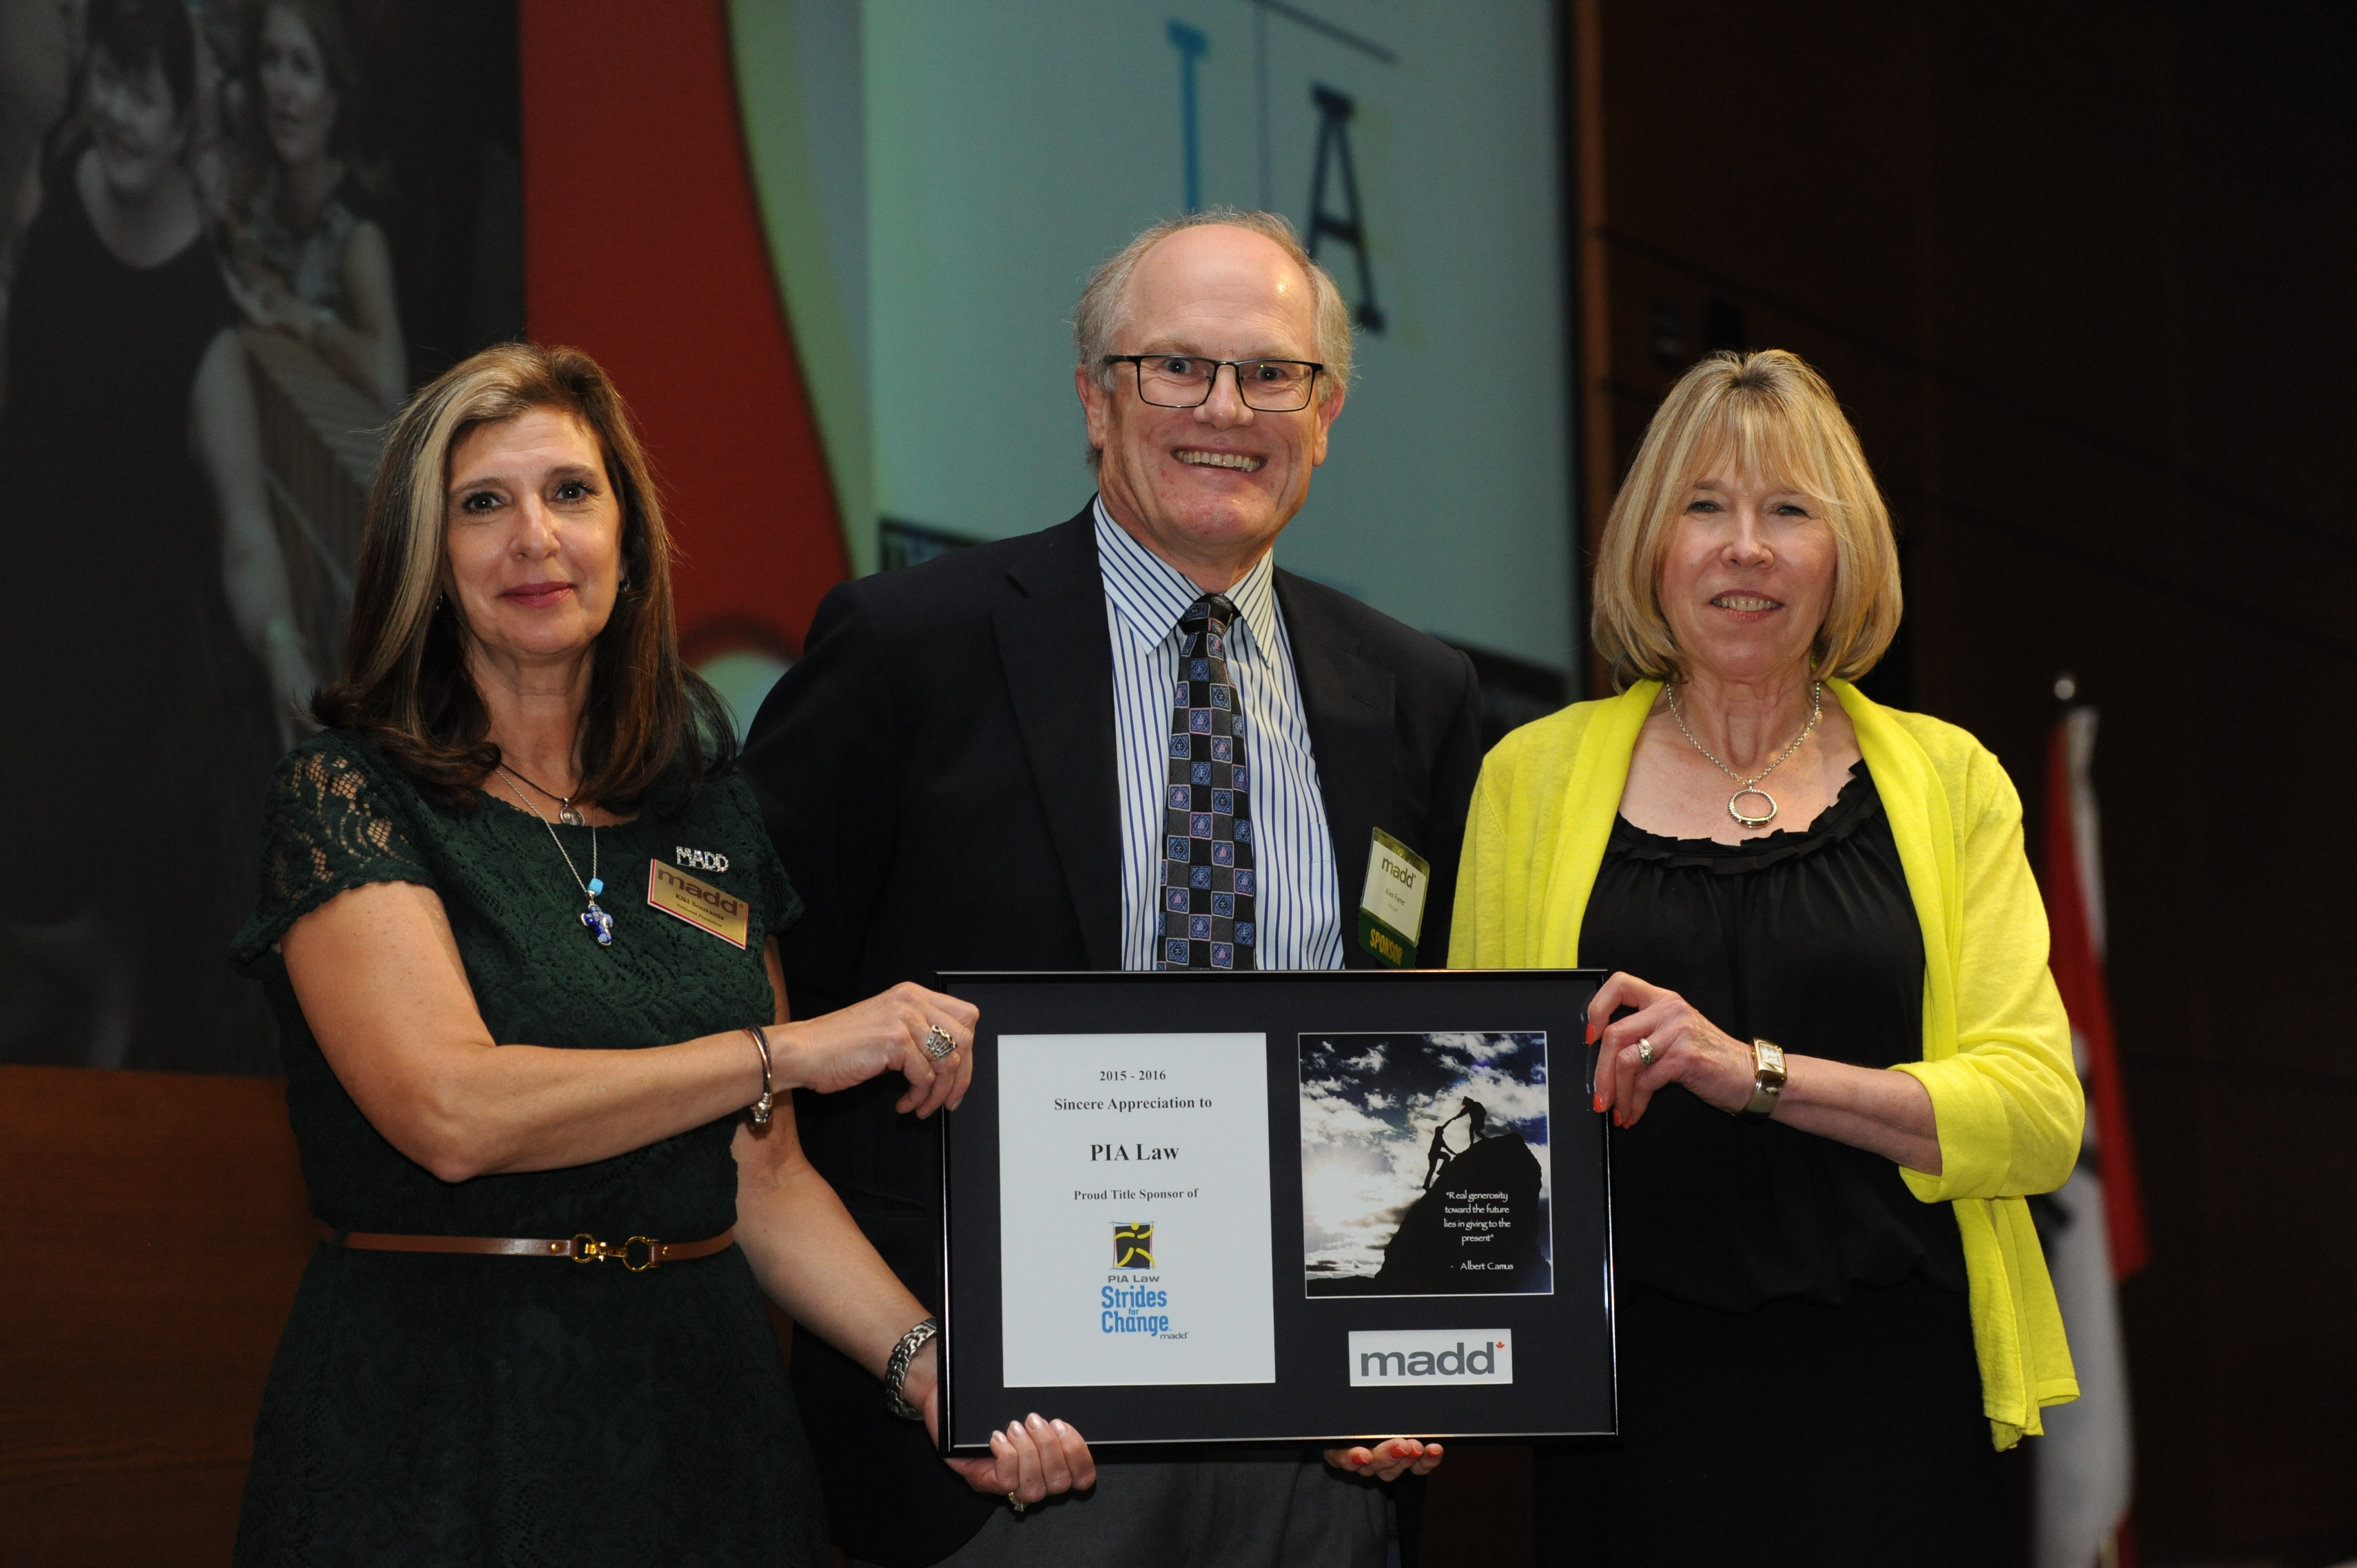 Alan Farrer, Managing Lawyer PIA Law, accepts an award in recognition of PIA Law's support of MADD Canada and Strides for Change. Presenting the award are Angeliki Souranis, National President, MADD Canada (left) and Margaret Stanowski, Chair of the National Board of Directors.